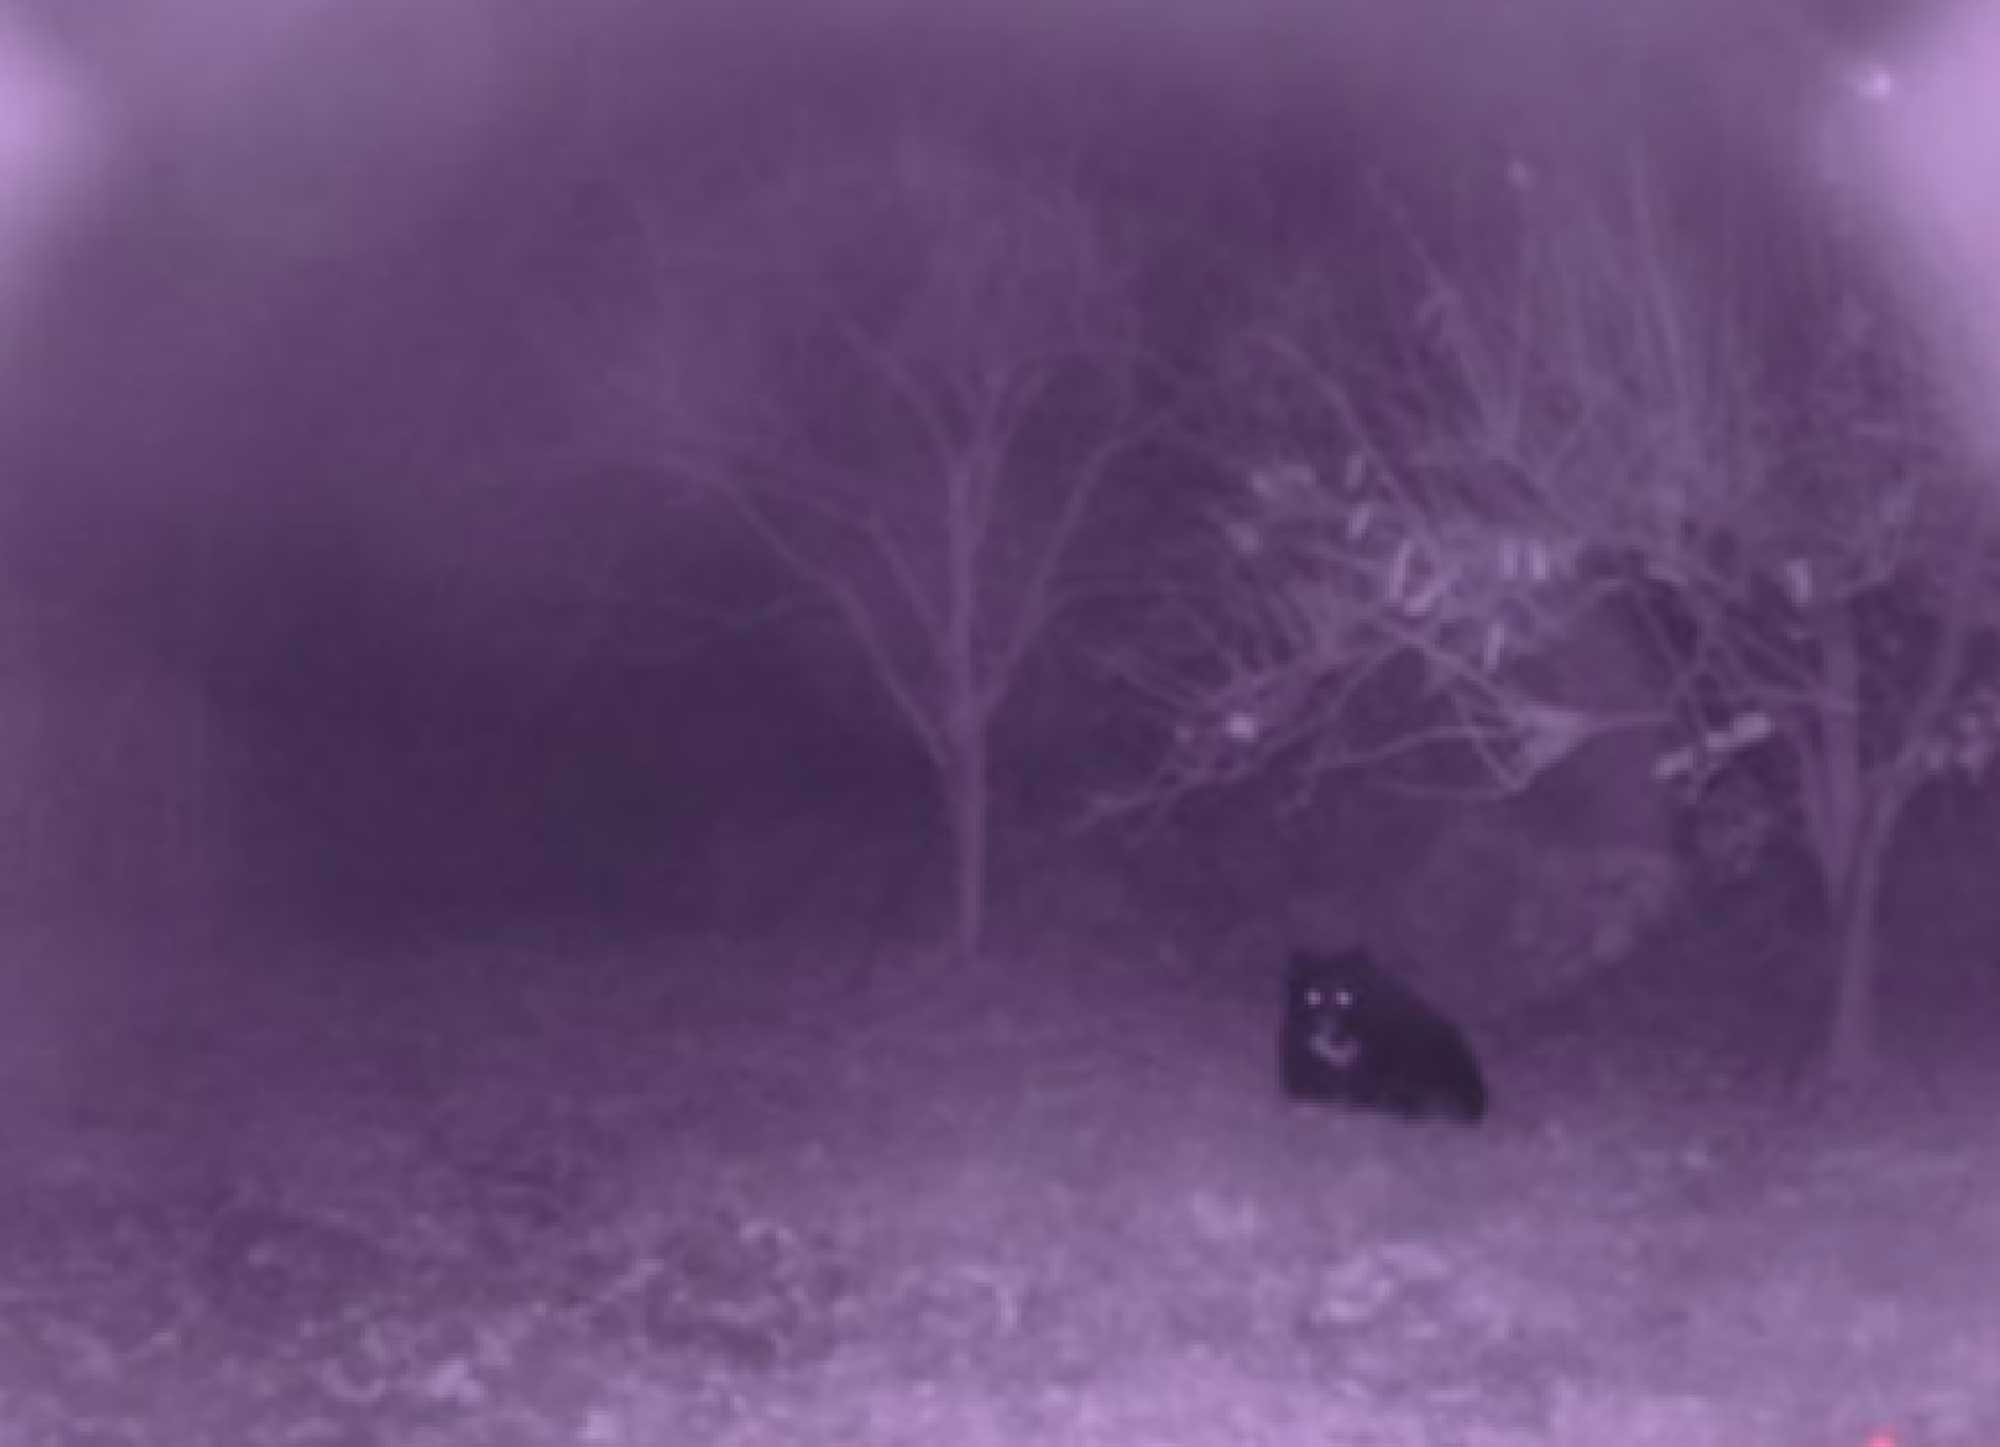 Image of a black bear captured by a wildlife detection system.